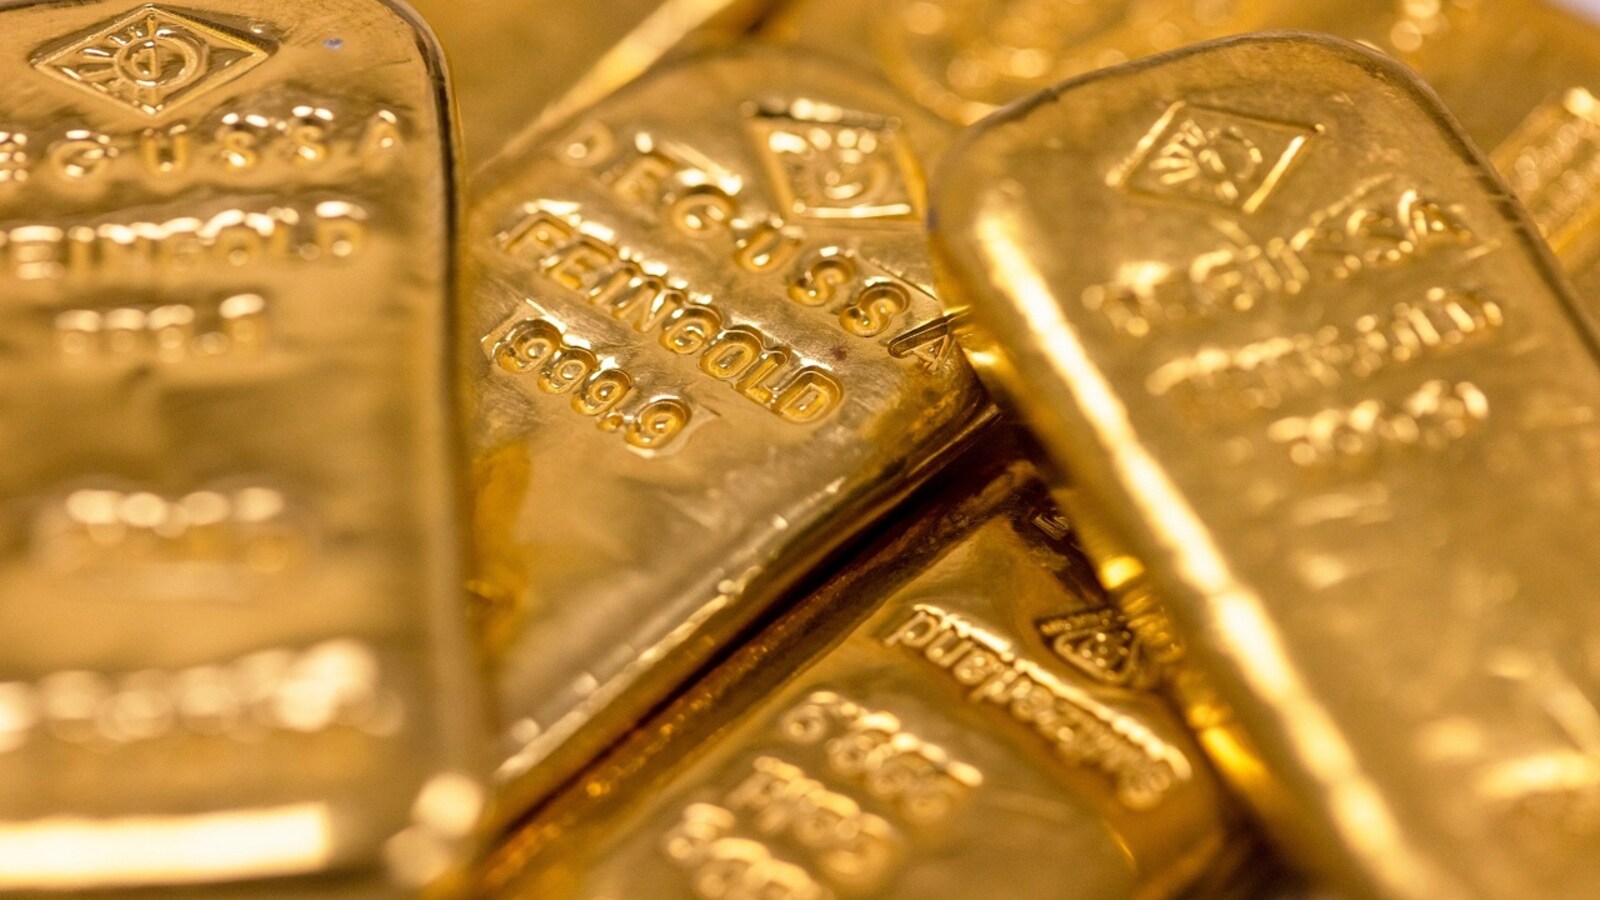 Gold, silver rates: Gold price dips again to Rs 45,950, silver